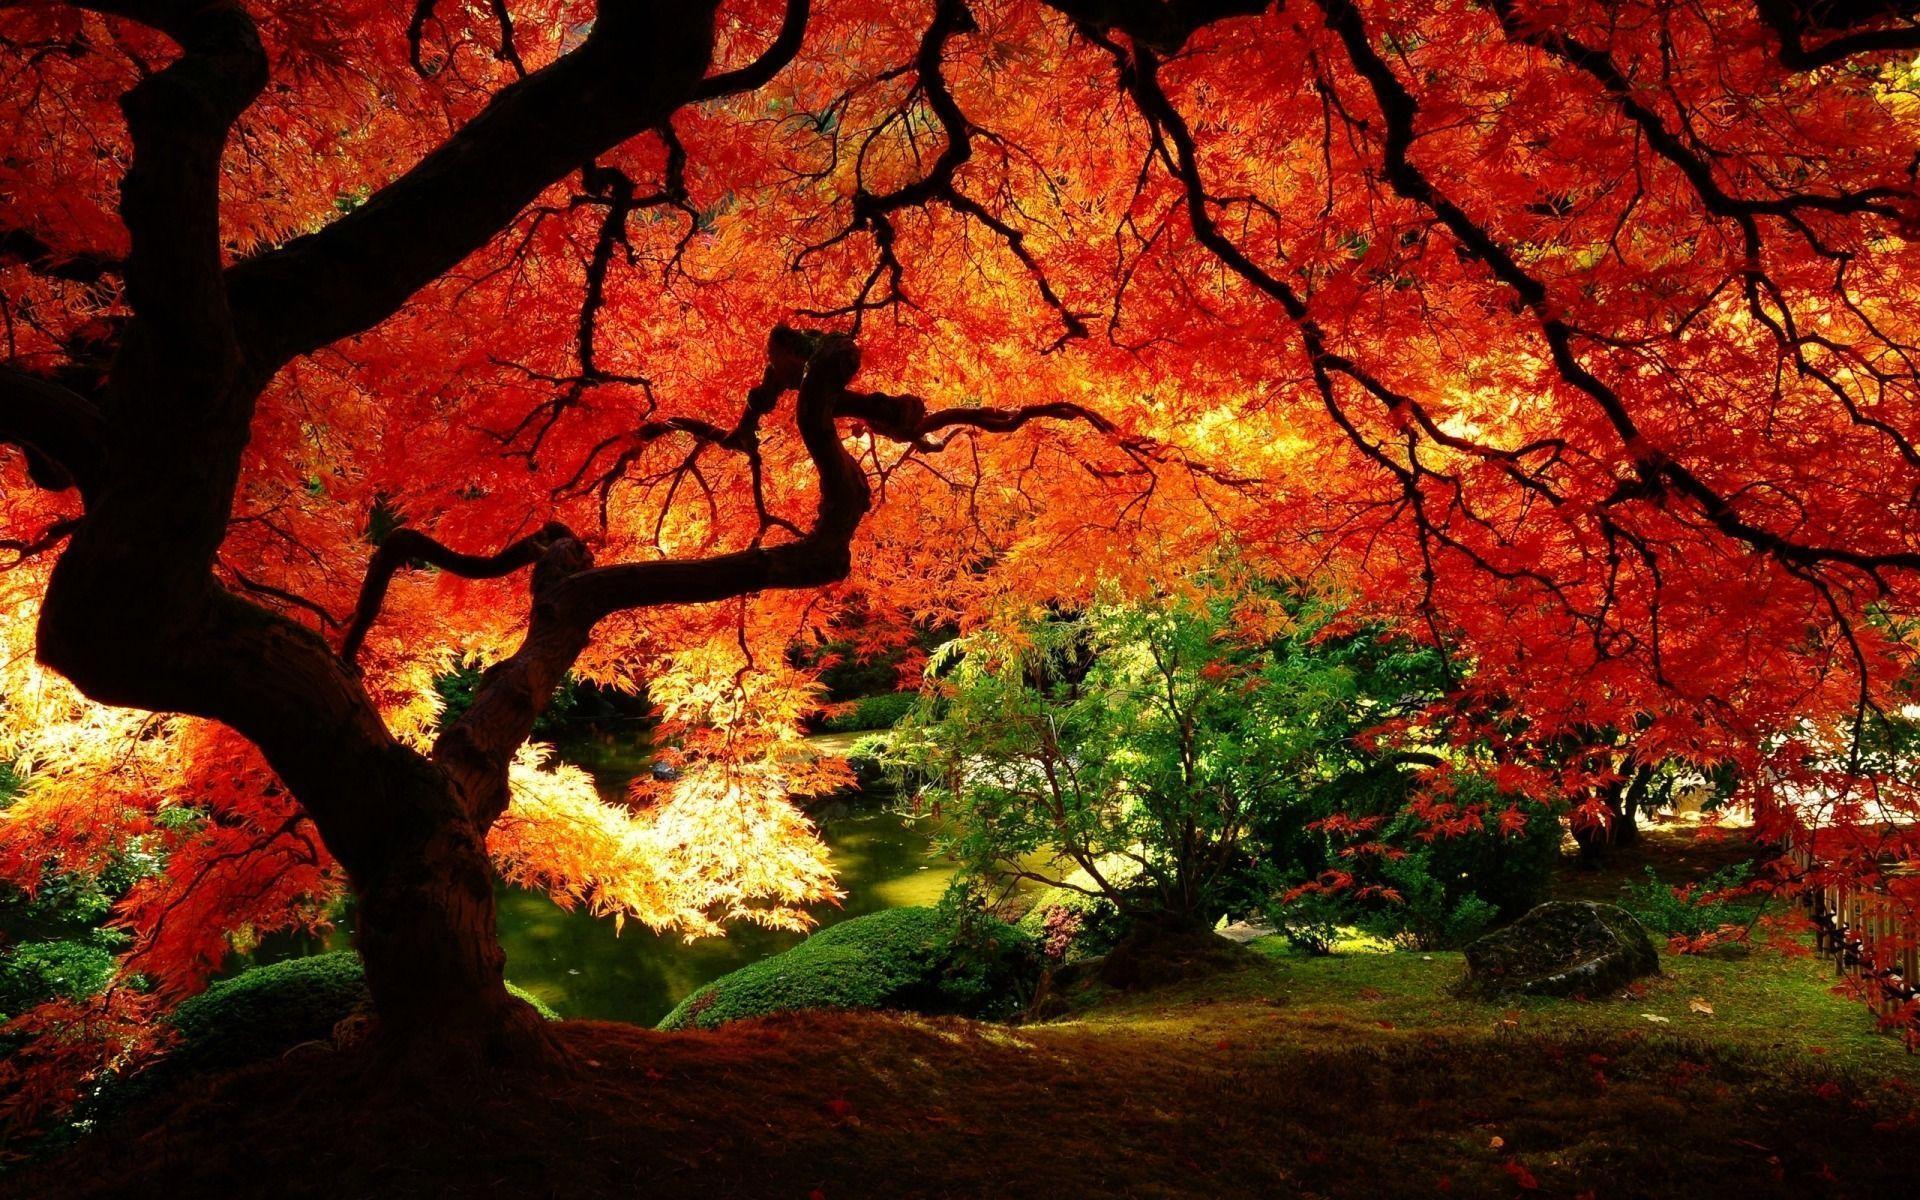 Trees with Red Leaves